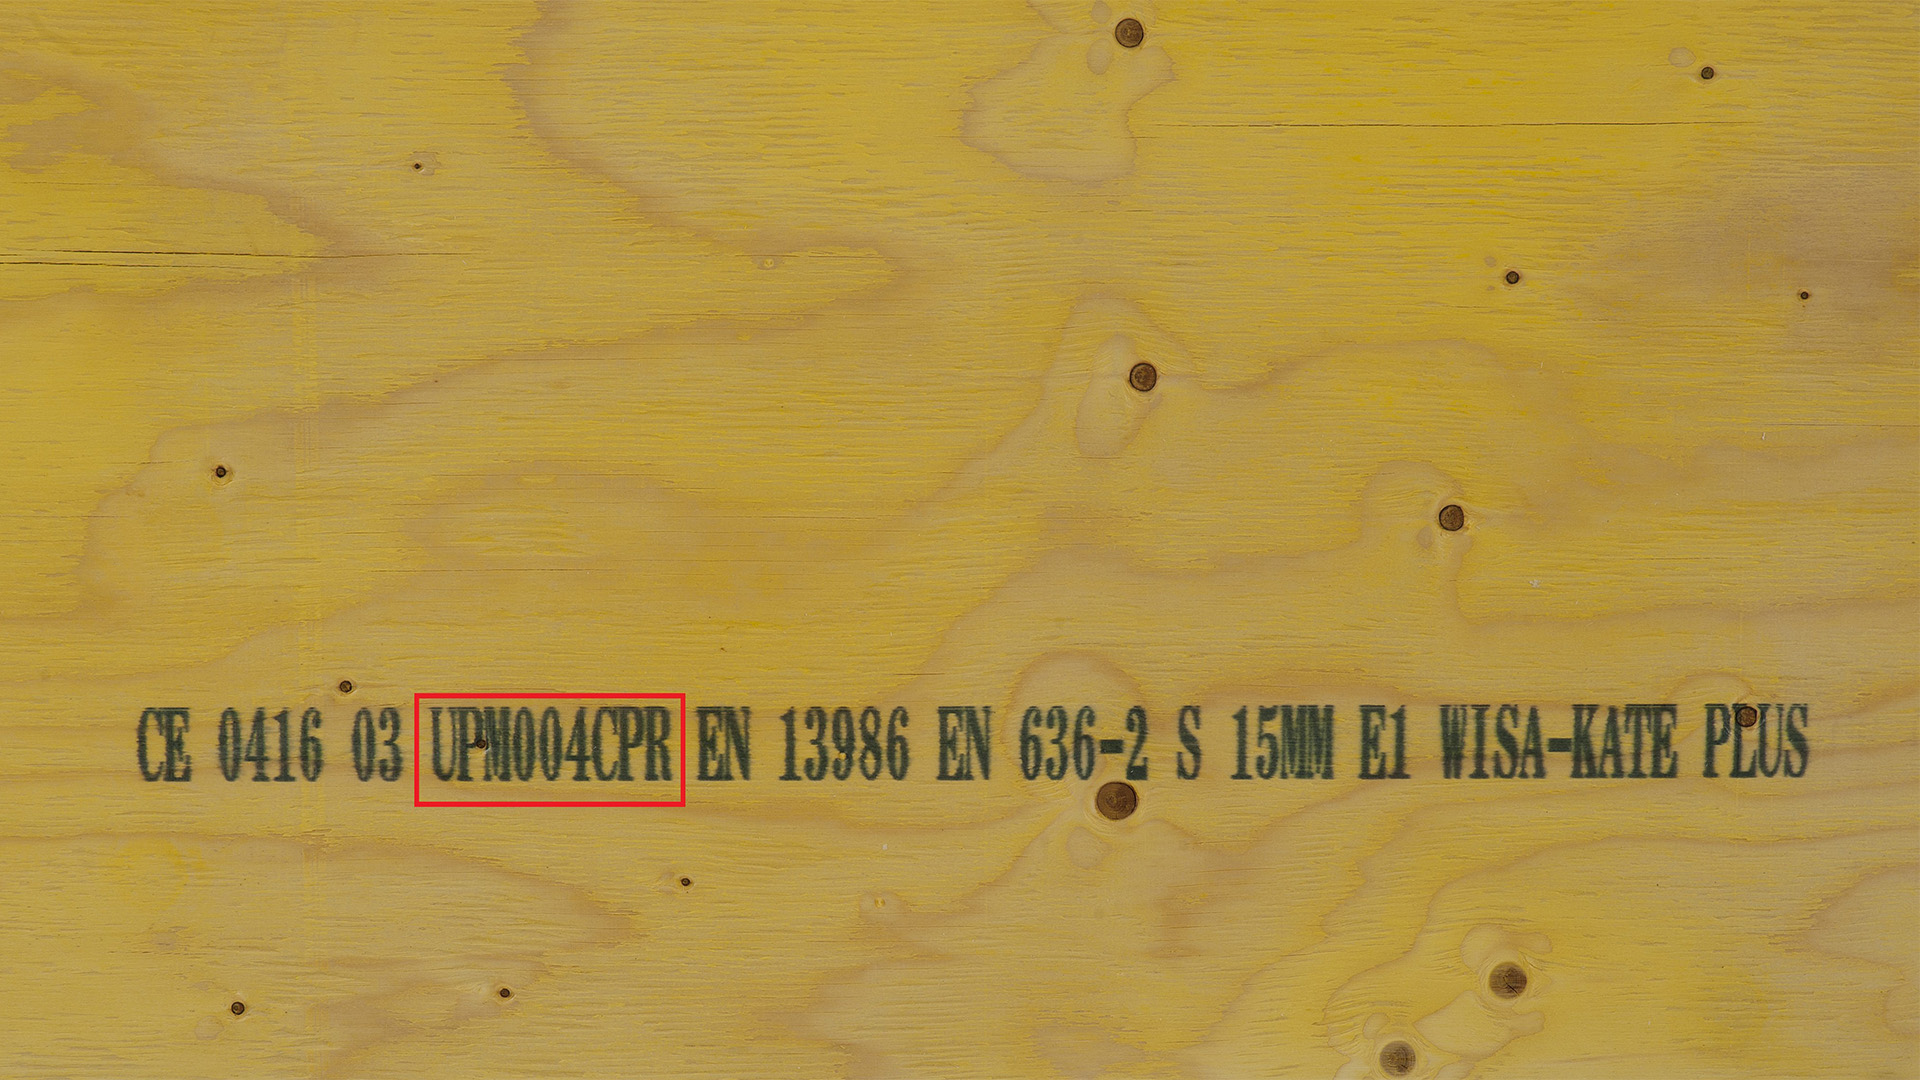 CE marked WISA plywood panel.